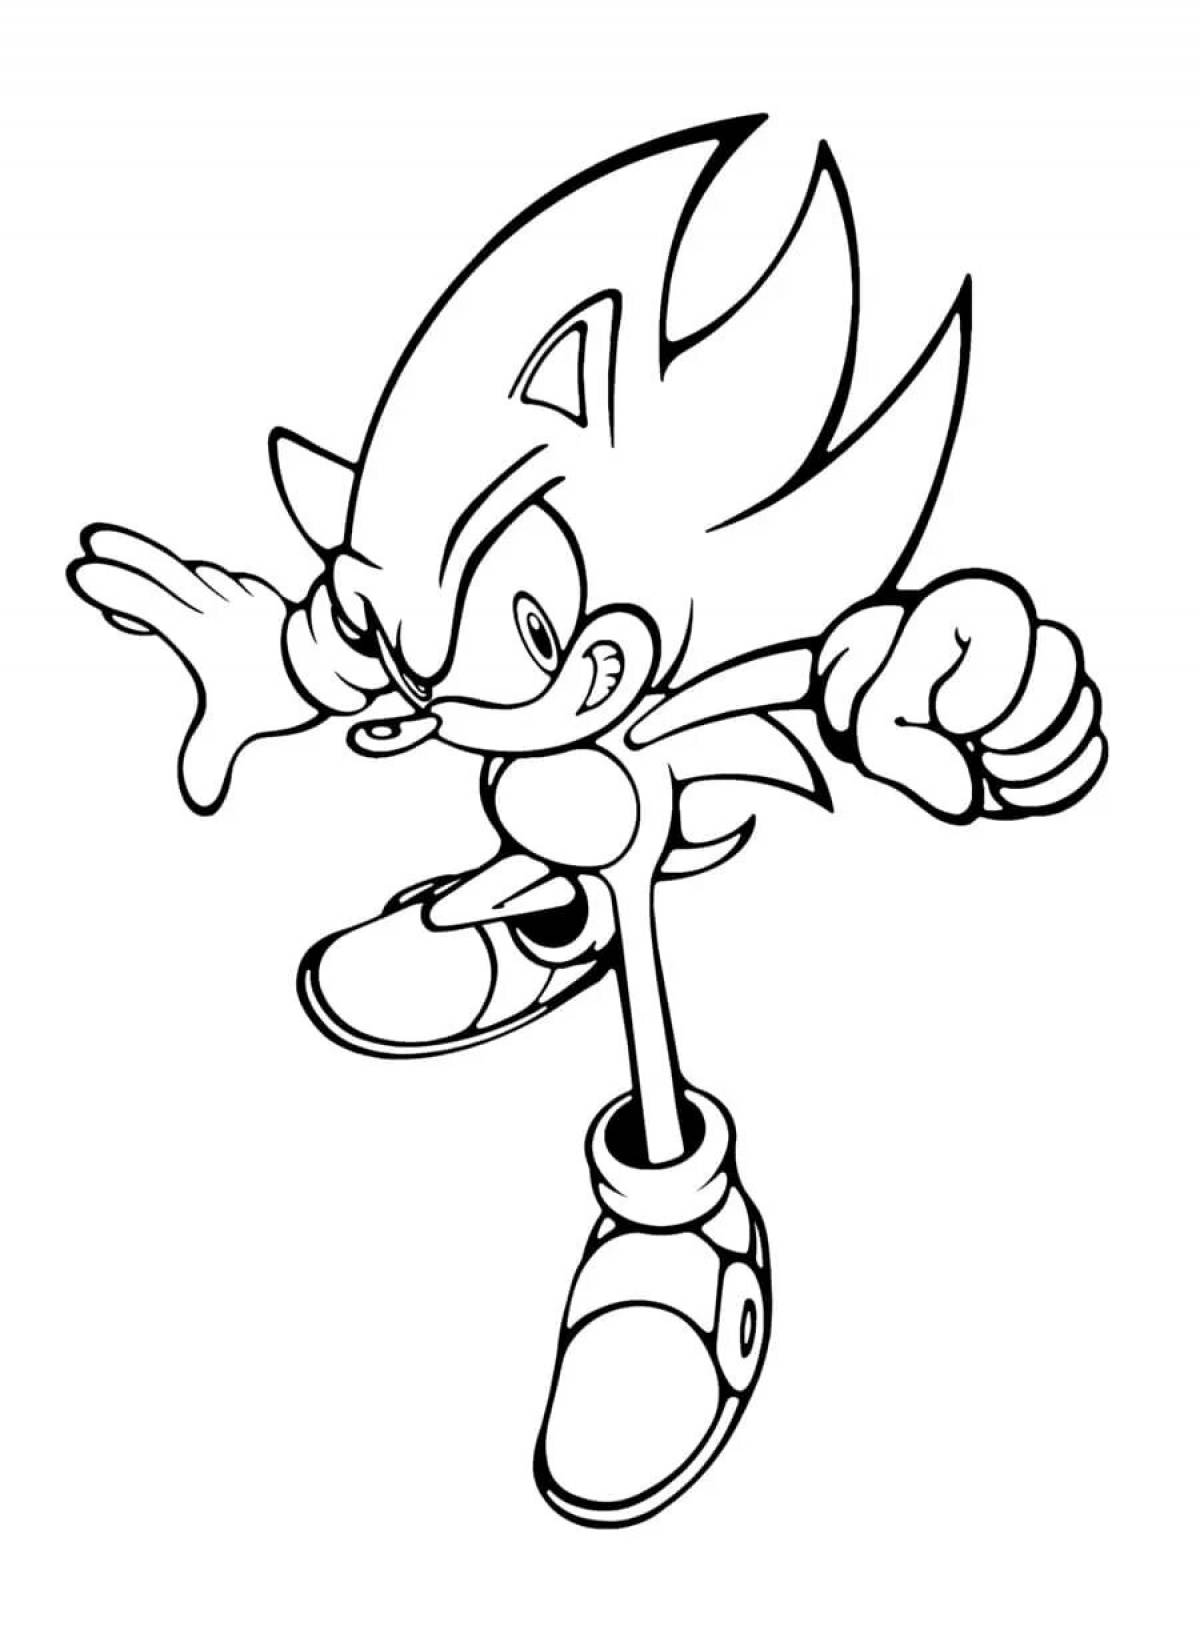 Fancy sonic the hedgehog coloring book